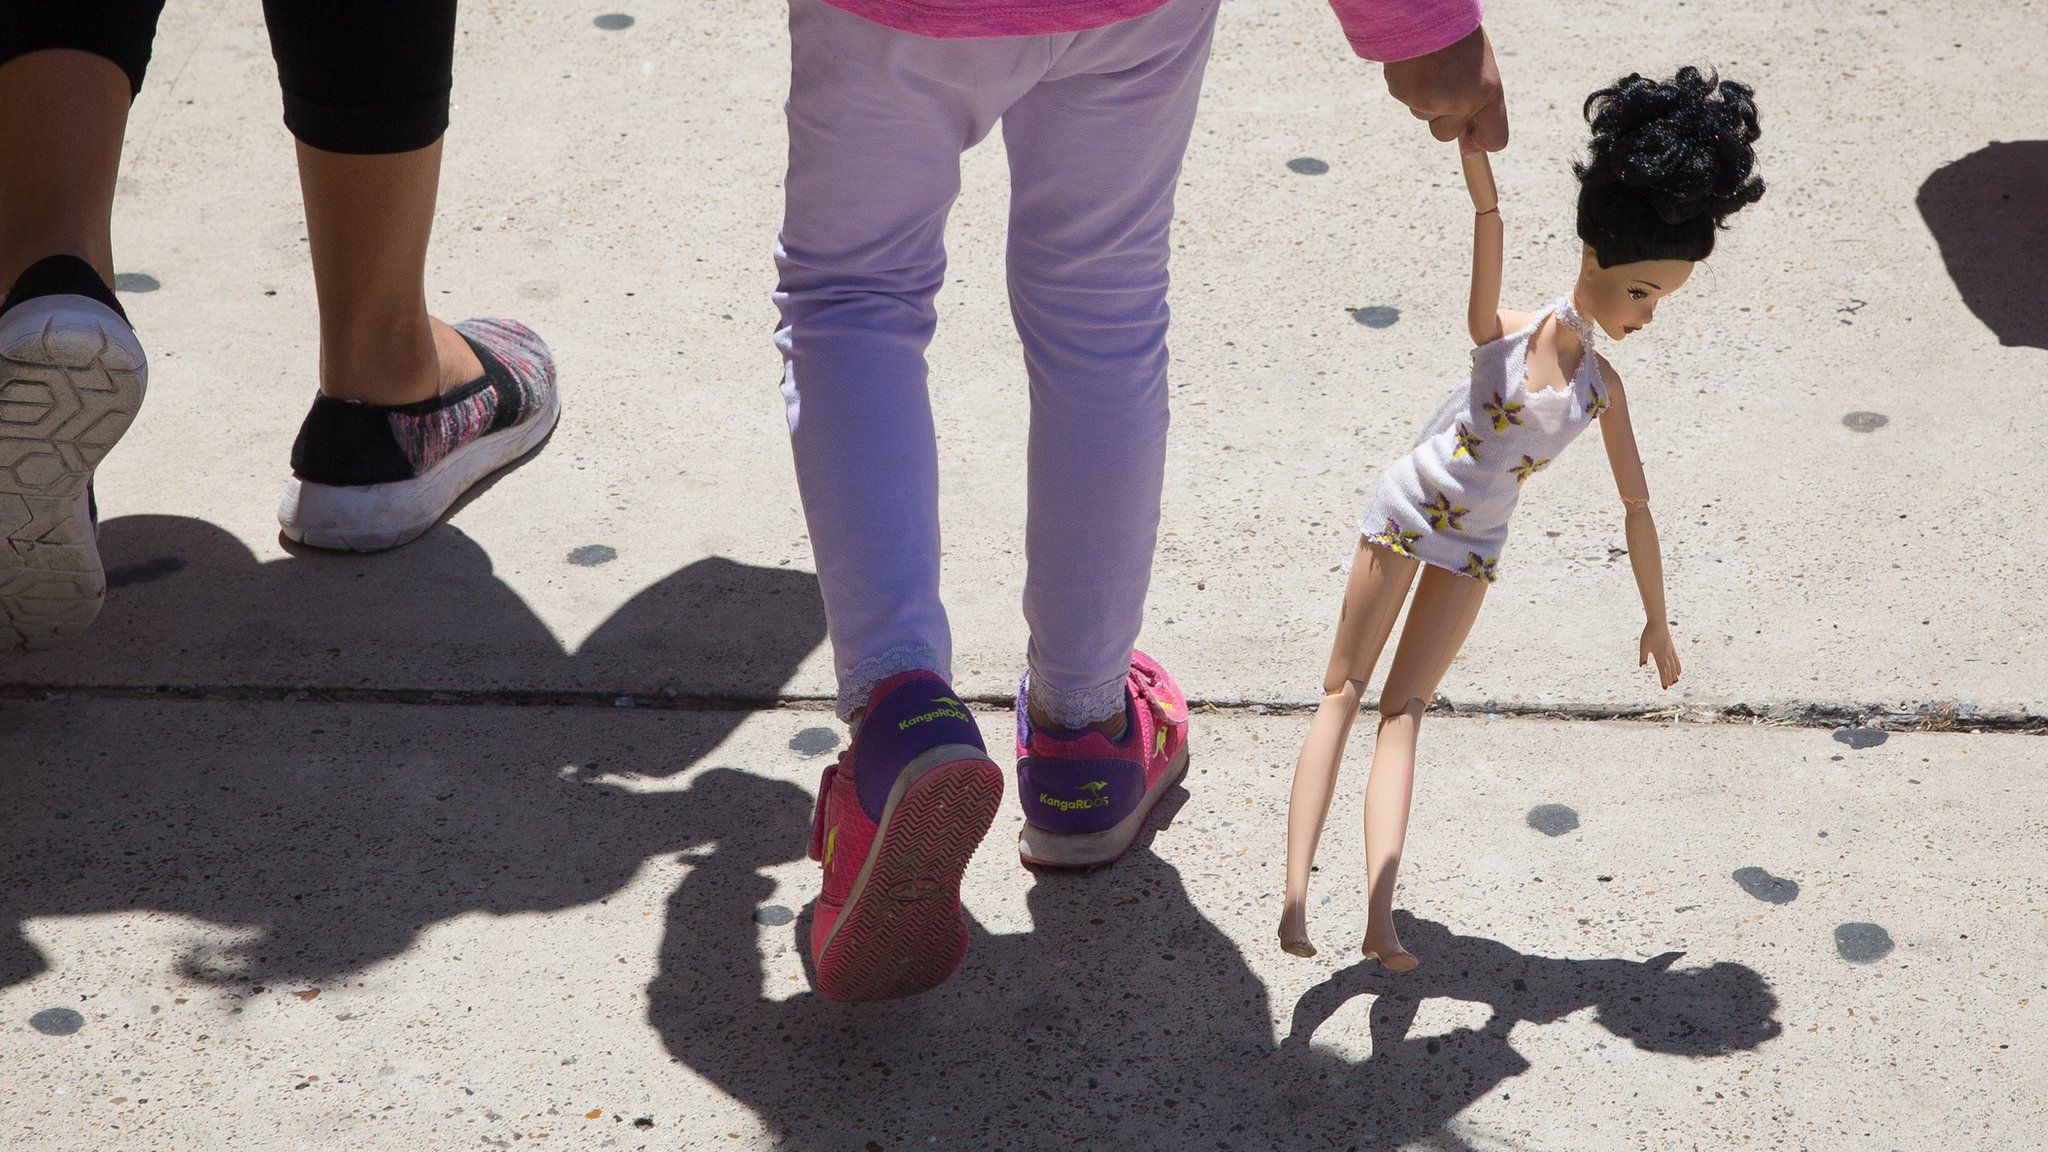 A 4-year-old Honduran girl carries a doll while walking with her immigrant mother